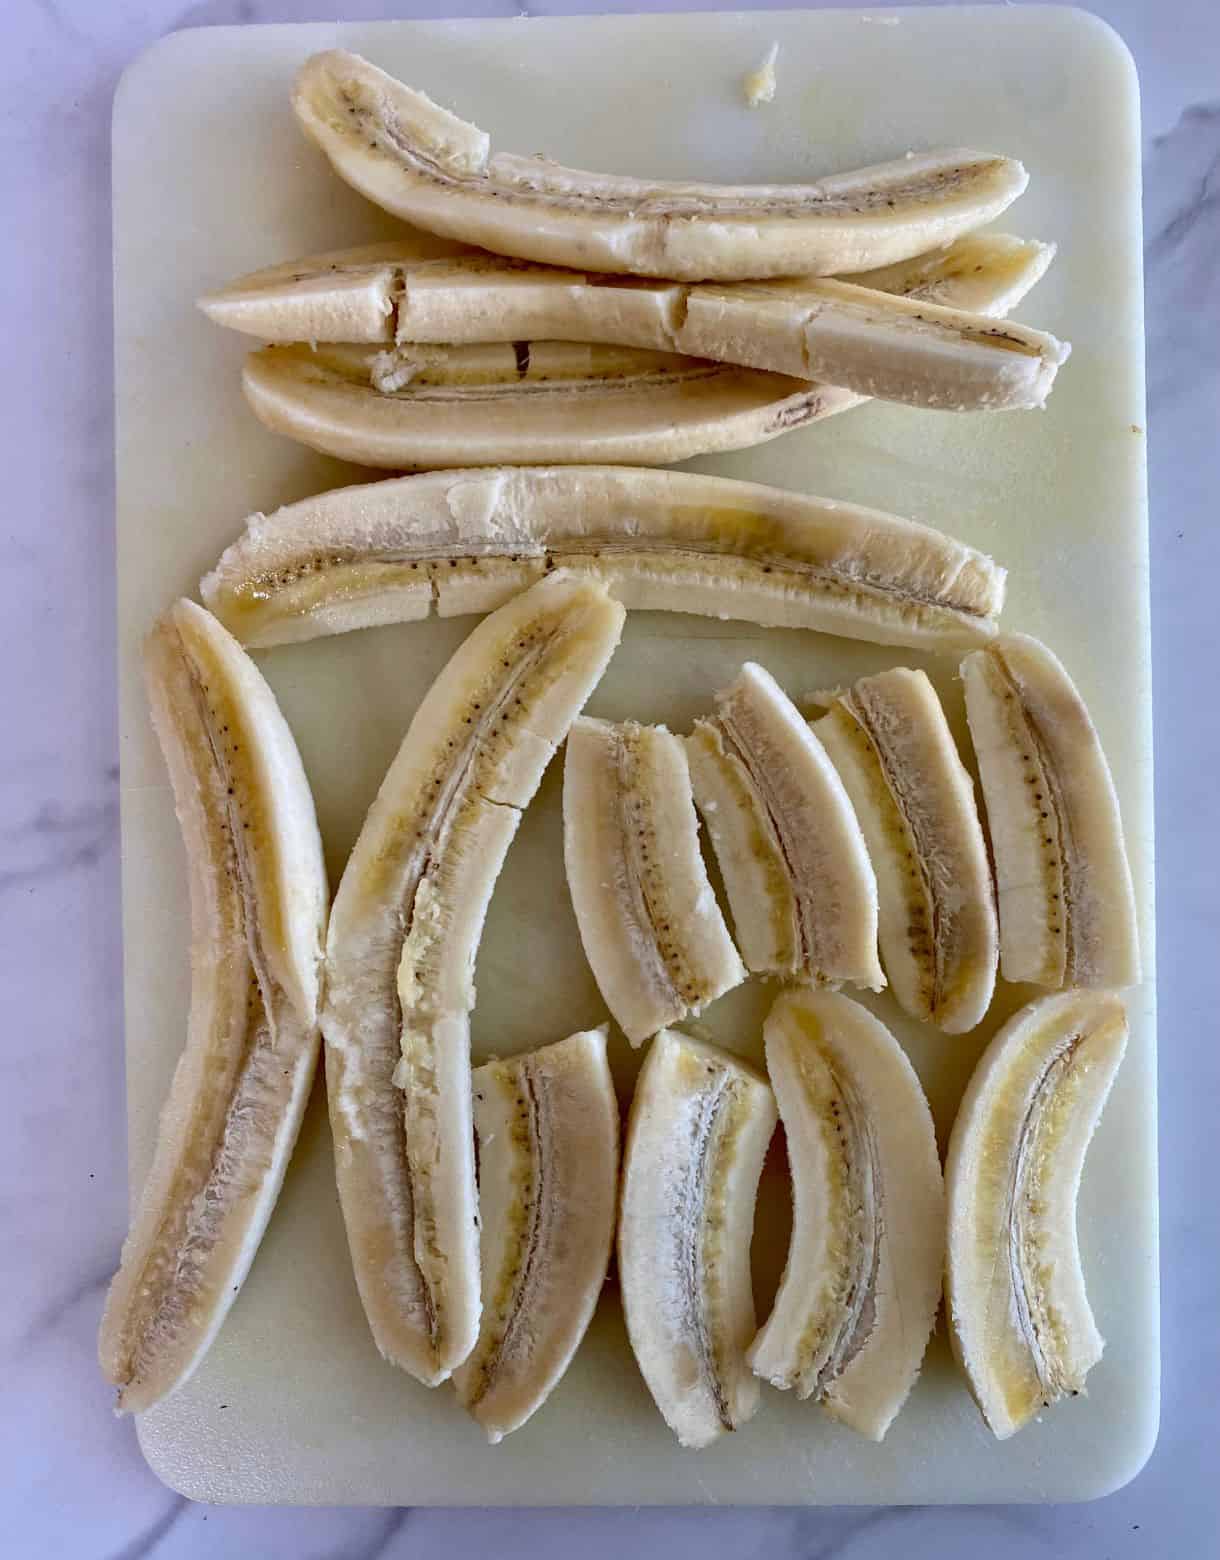 A cutting board with peeled bananas sliced in half lengthwise.